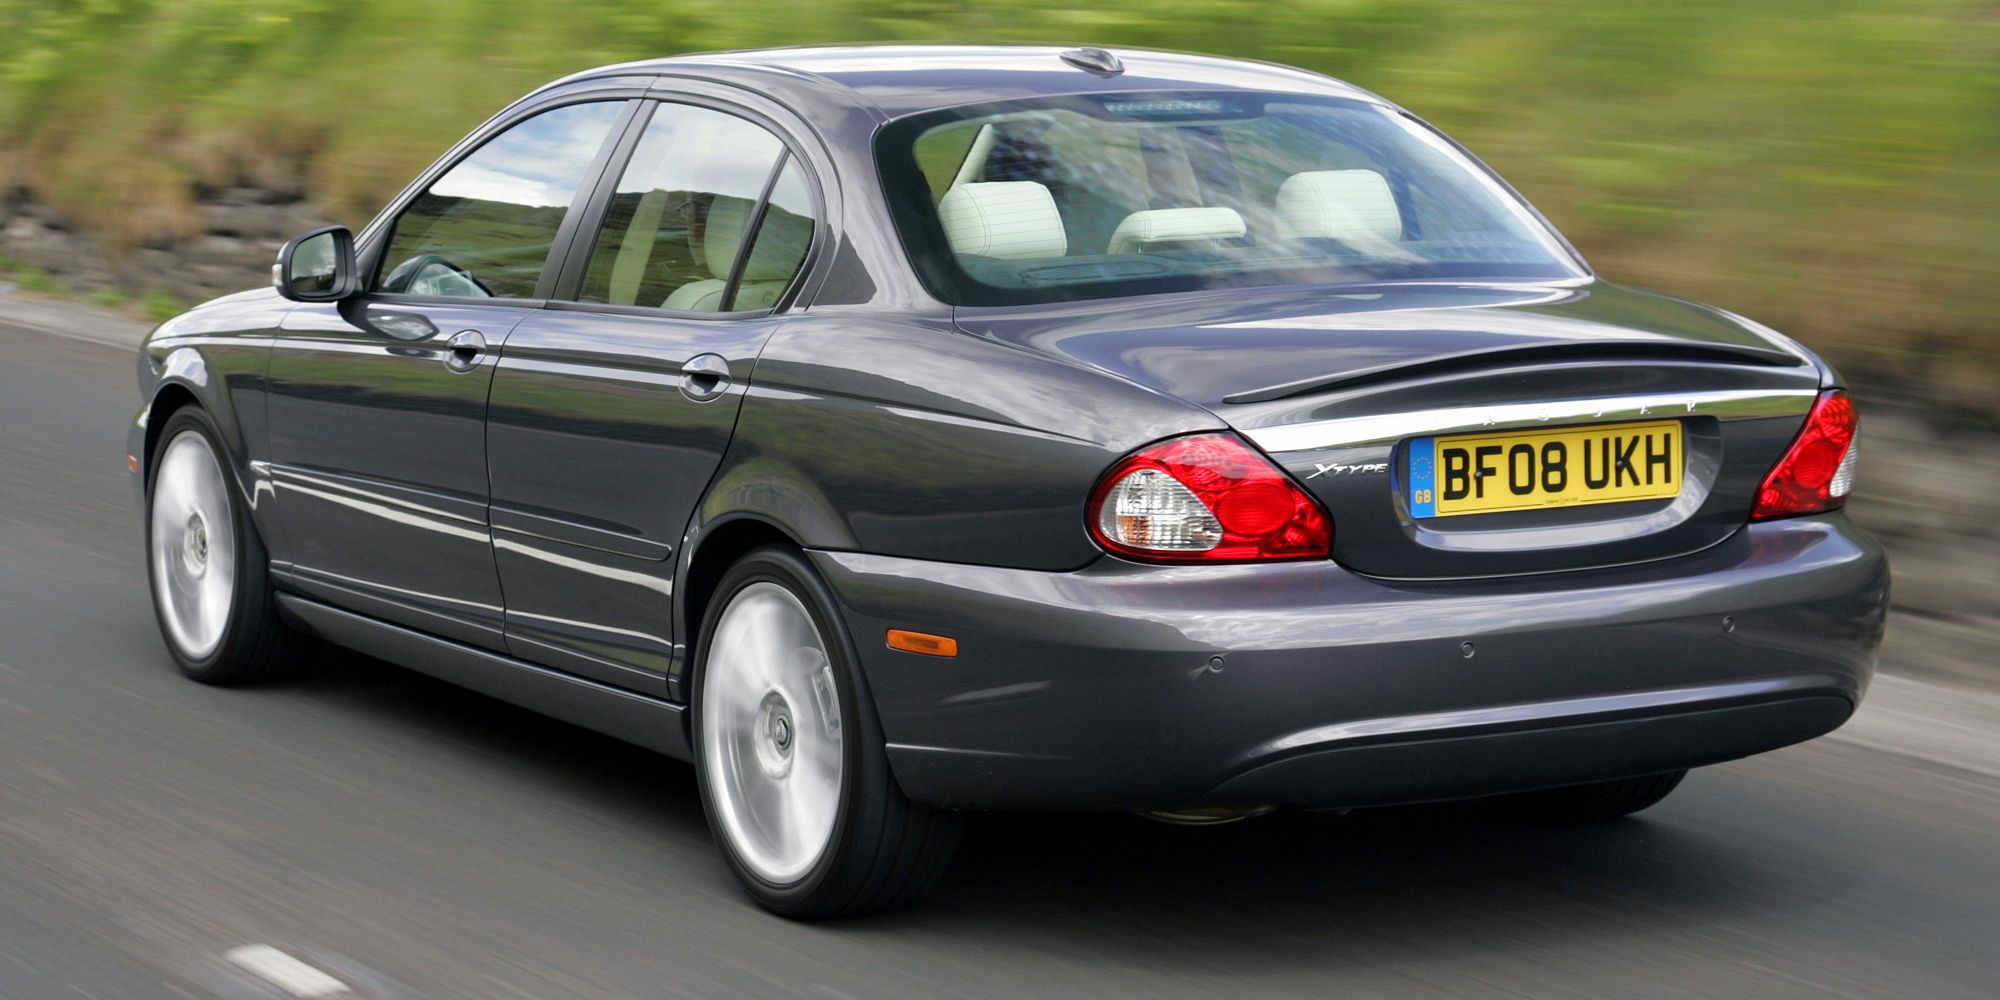 Rear 3/4 view of a gray X-Type sedan on the move